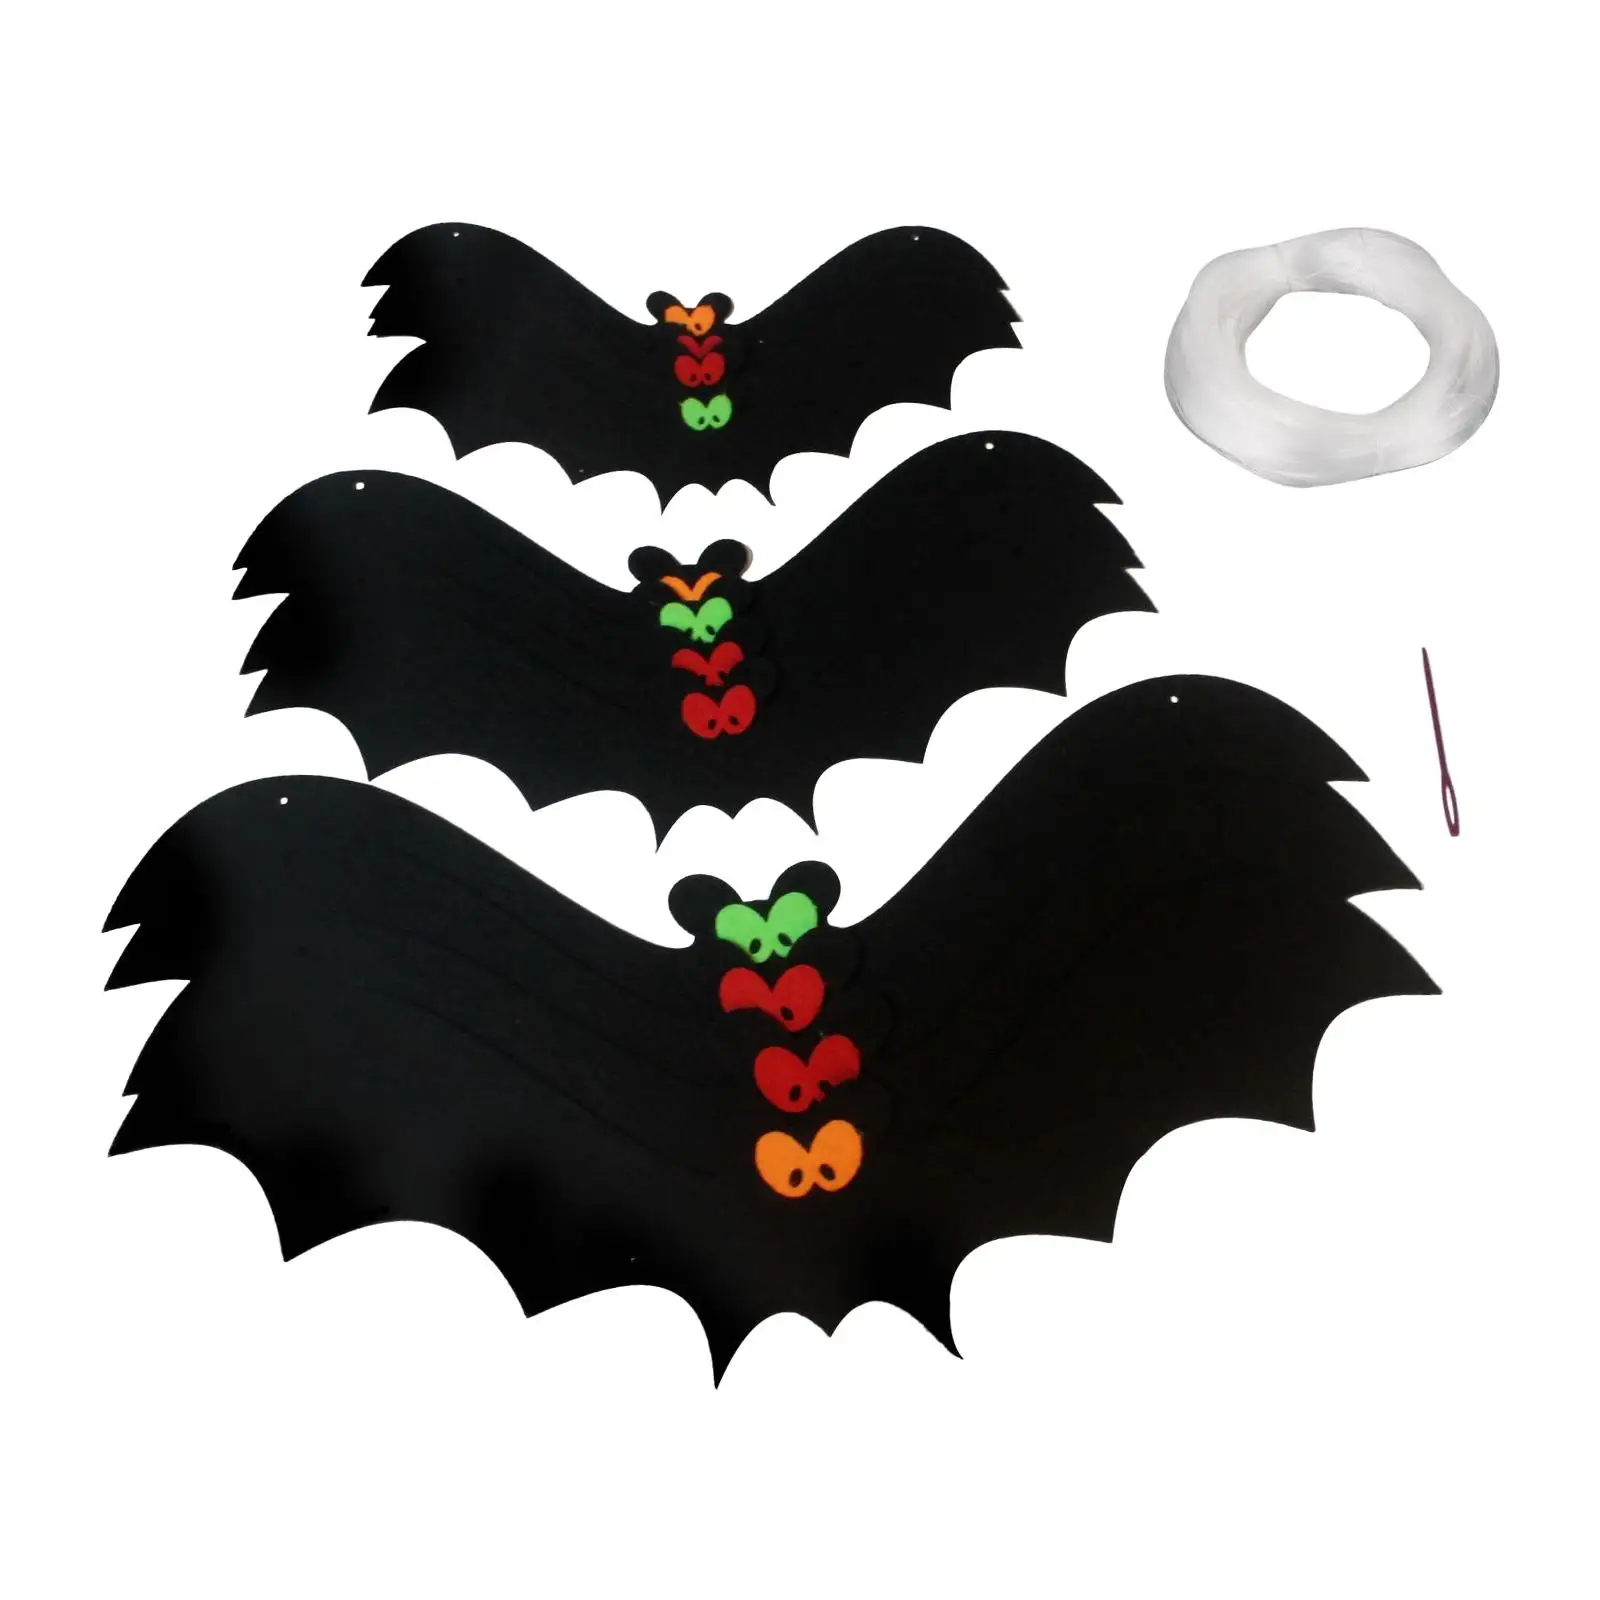 12 Pieces Halloween Ceiling Decoration Pendant Decors Halloween Hanging Ornaments for Outdoor Indoor Holiday home KTV Party